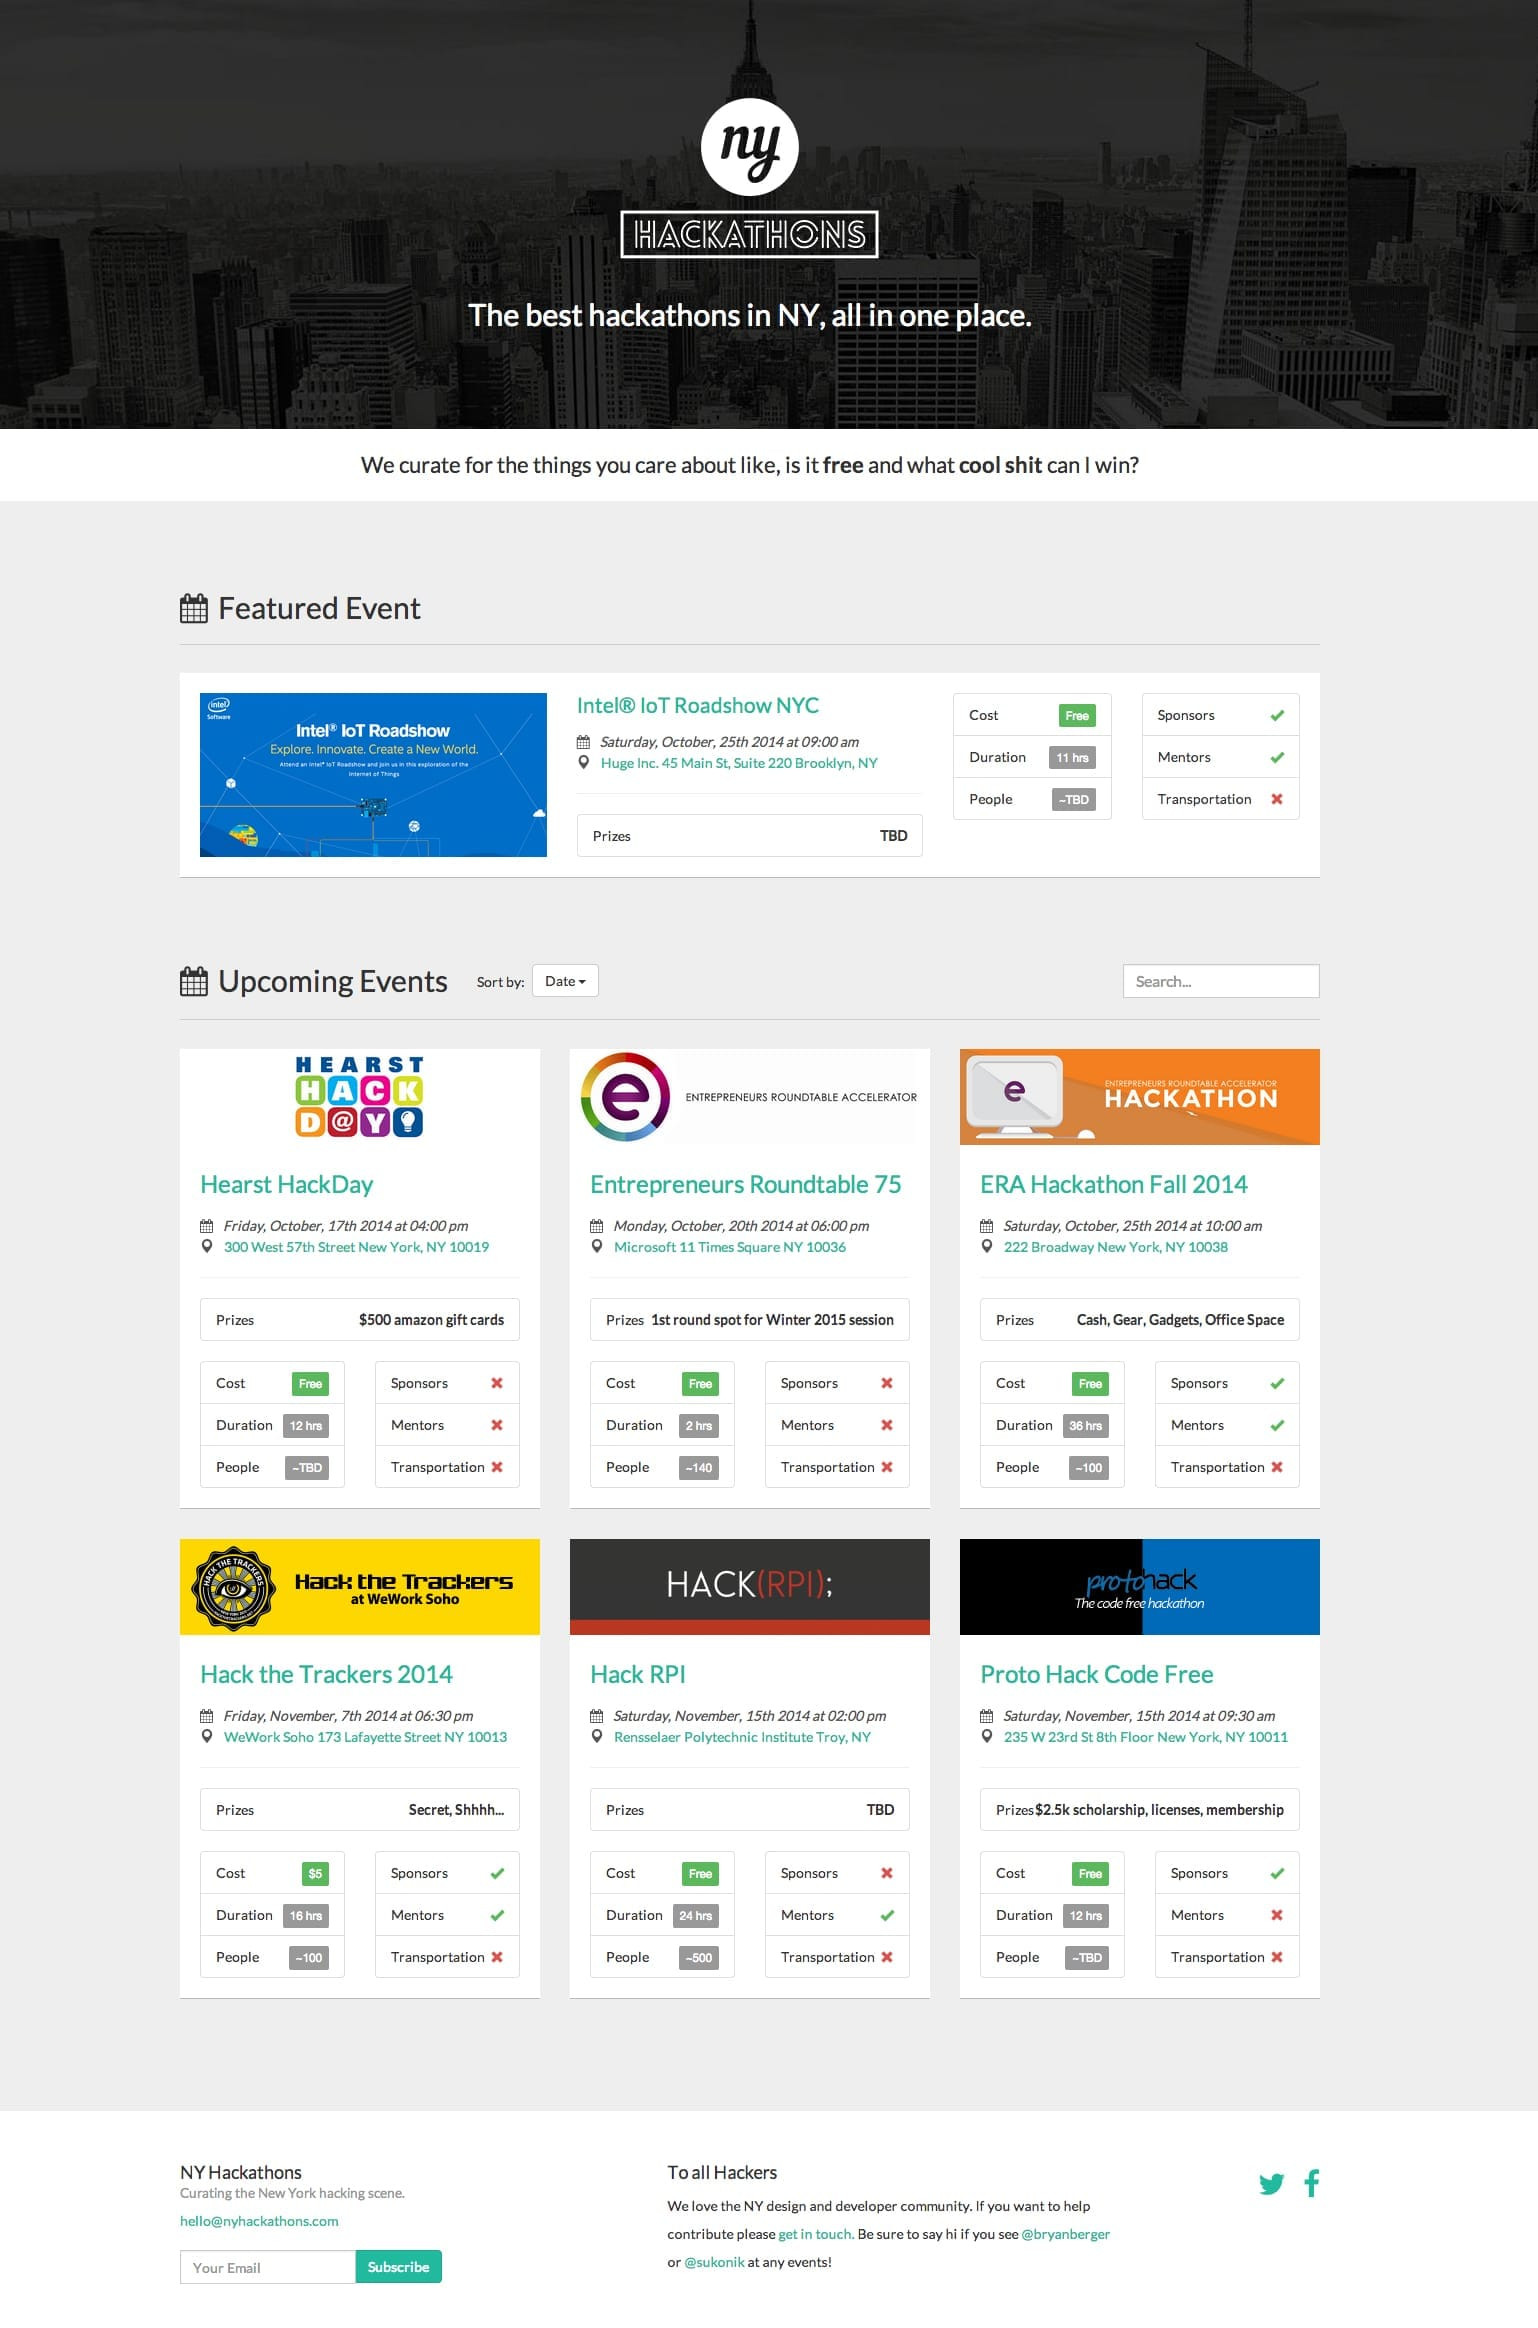 The NY Hackathons home page